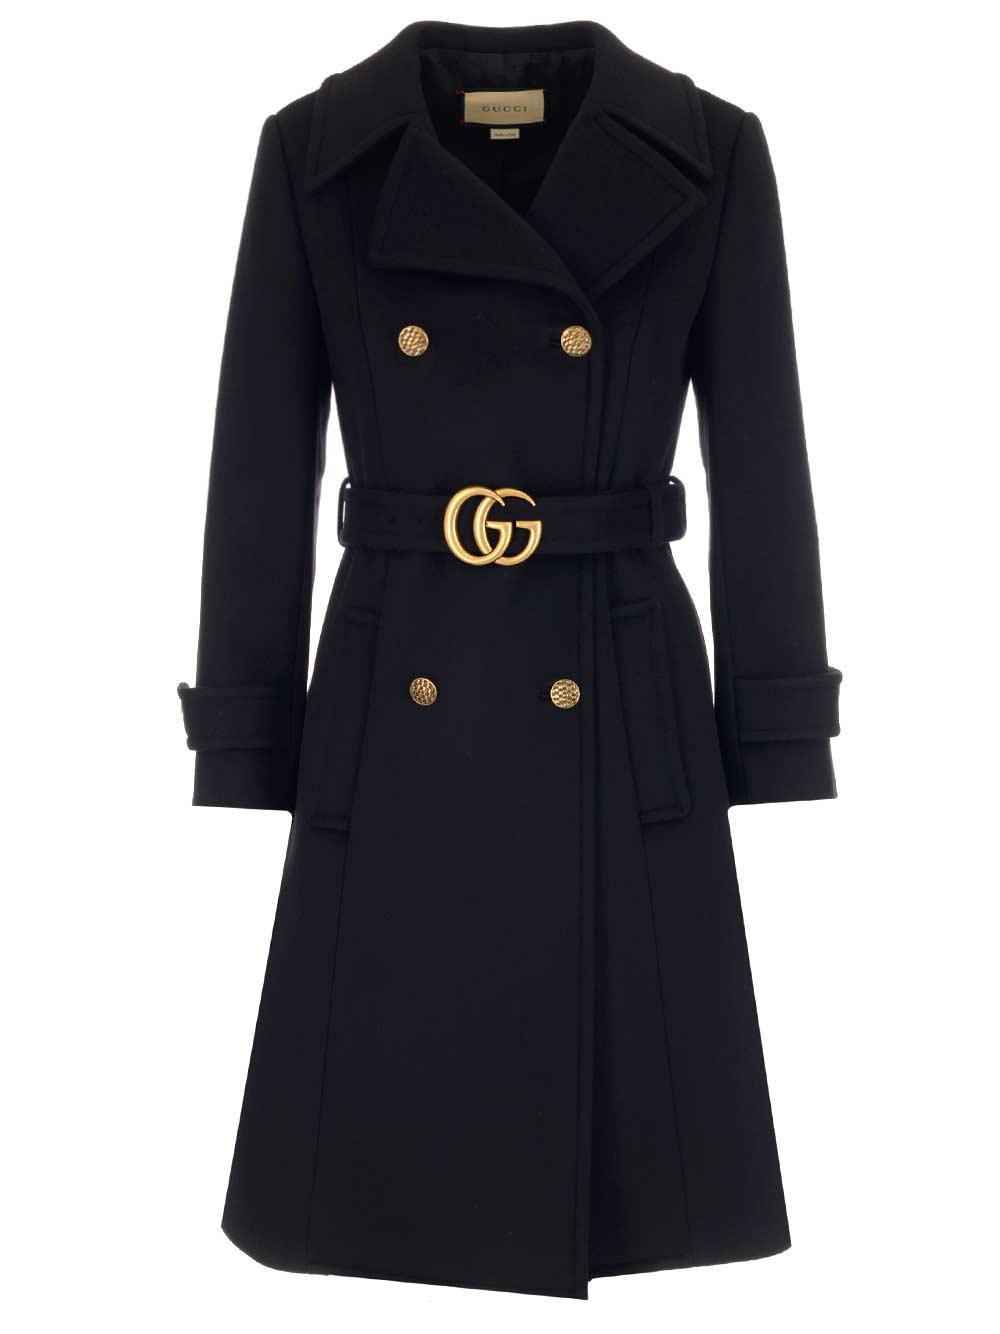 Gucci Double G Coat in Black | Lyst